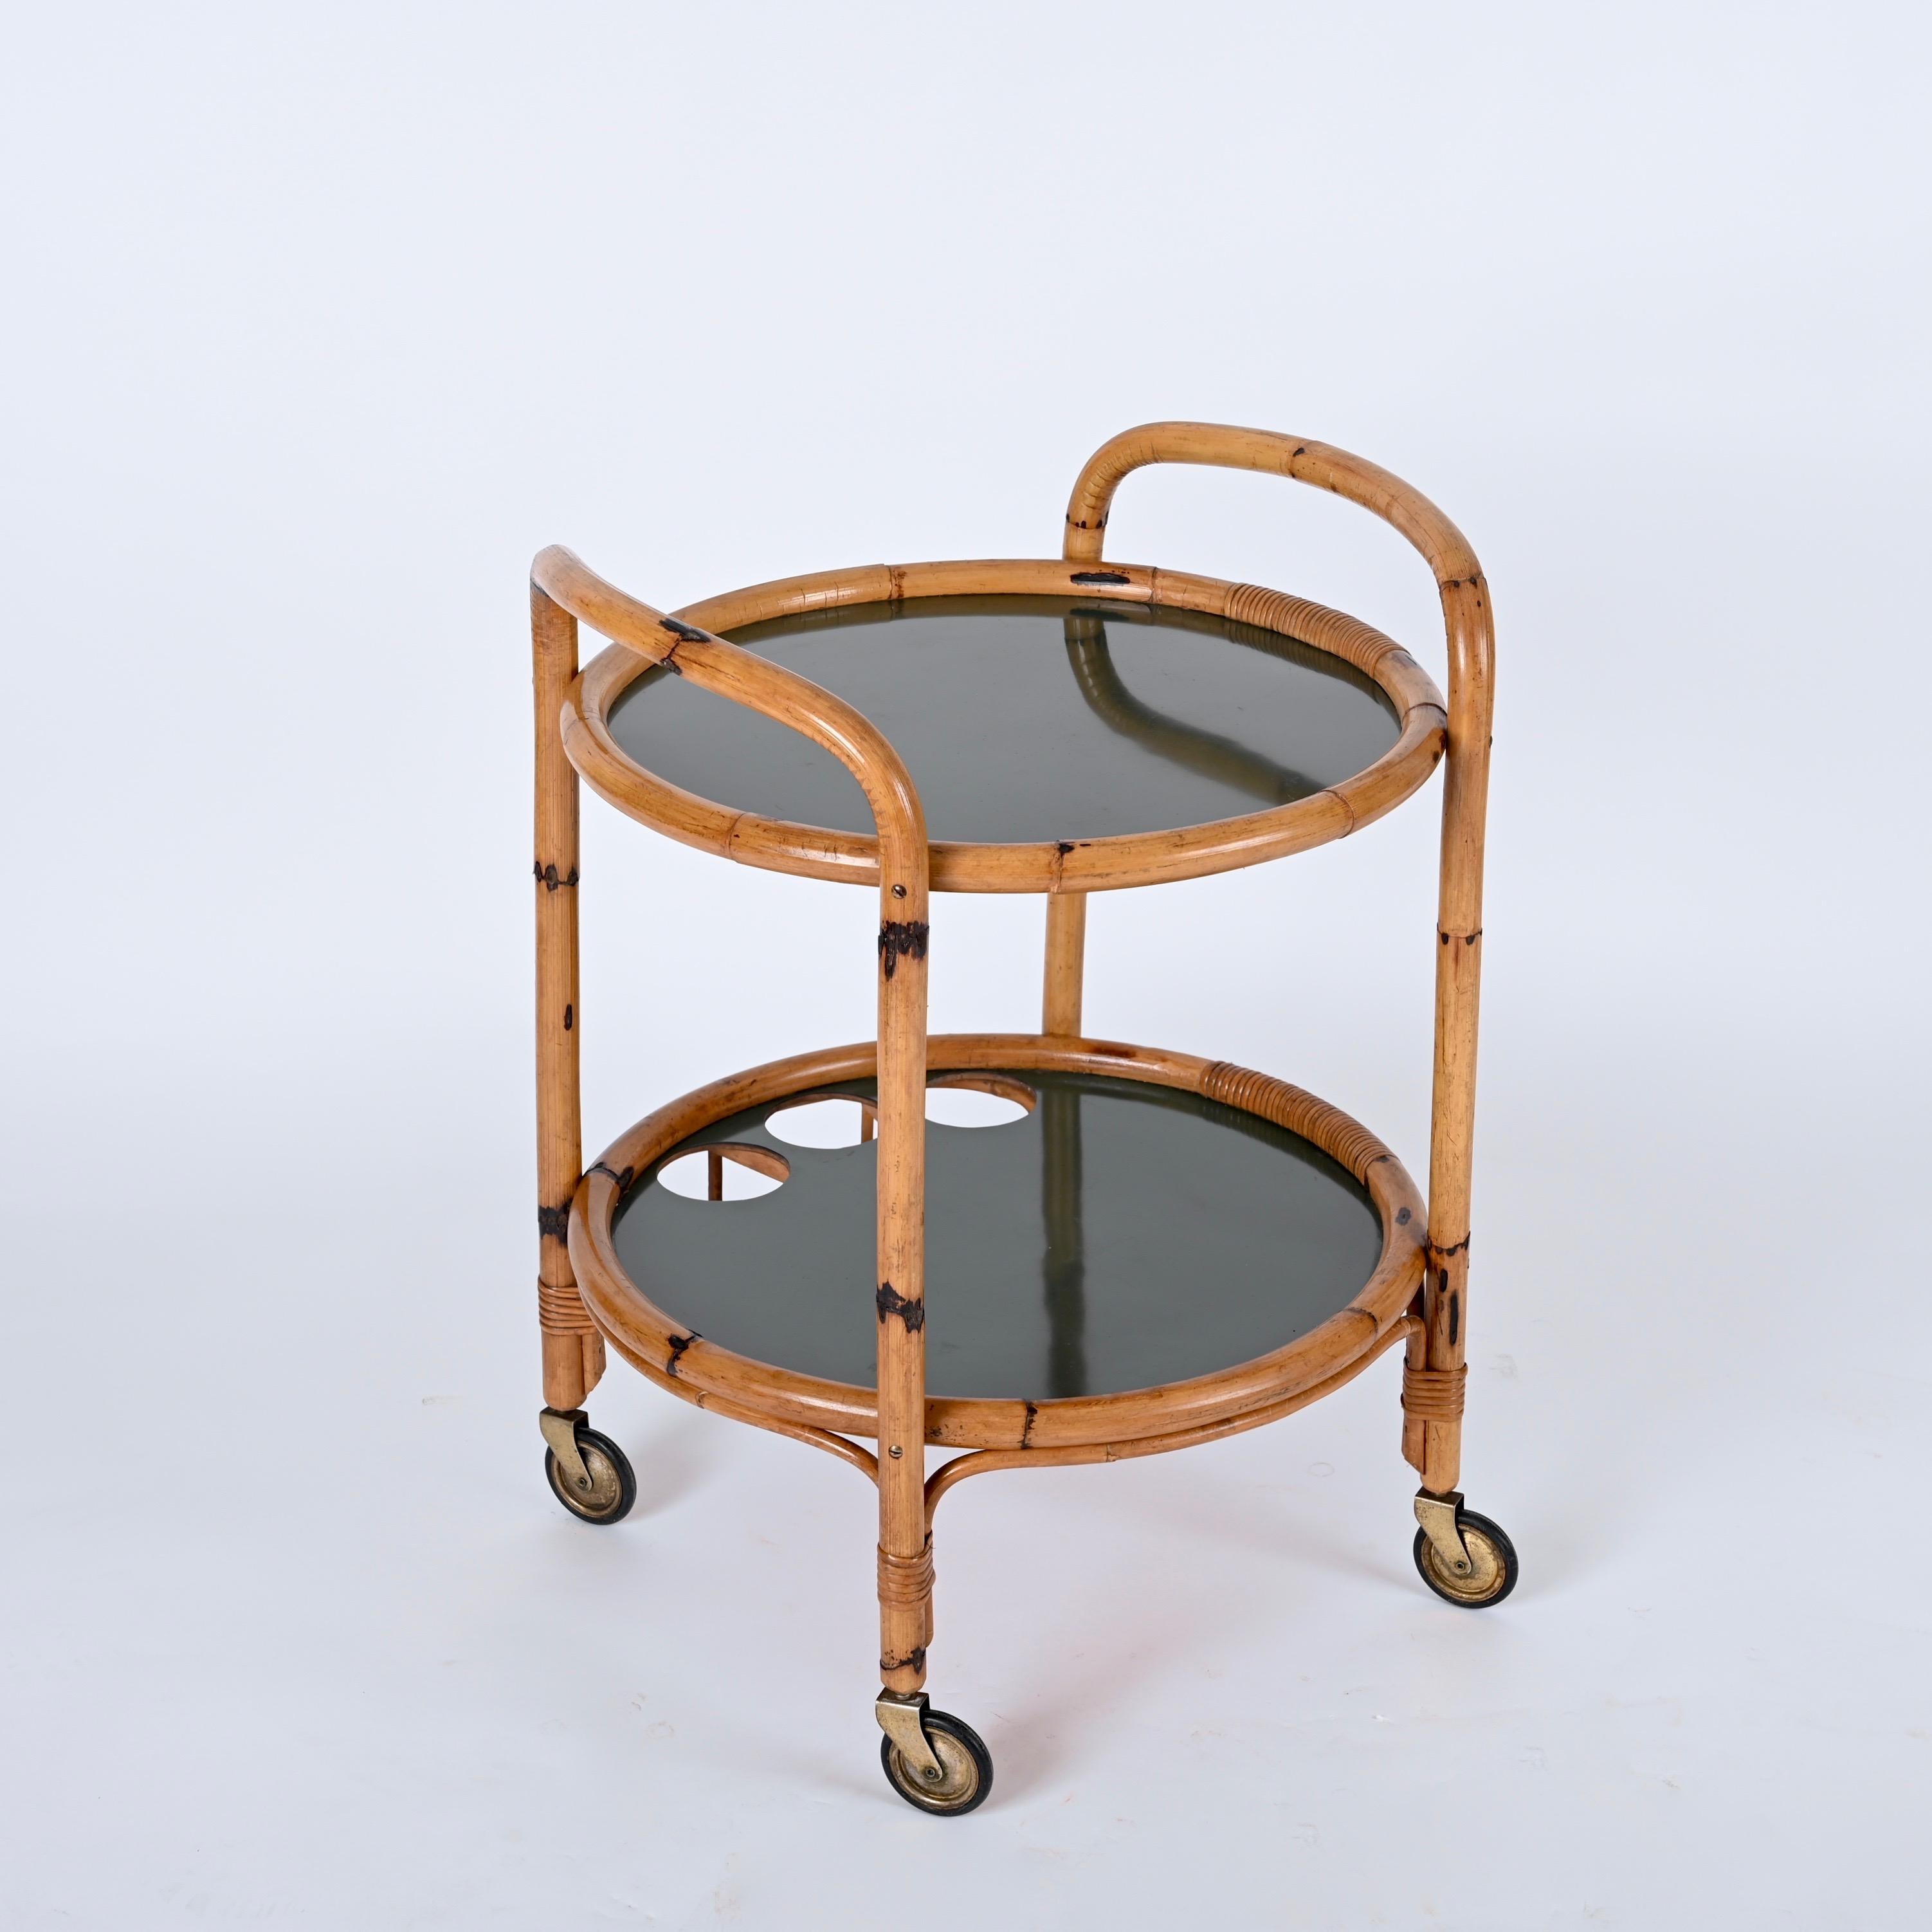 Italian Midcentury Bar Serving Cart in Bamboo, Rattan and Green Formica, Italy, 1970s For Sale